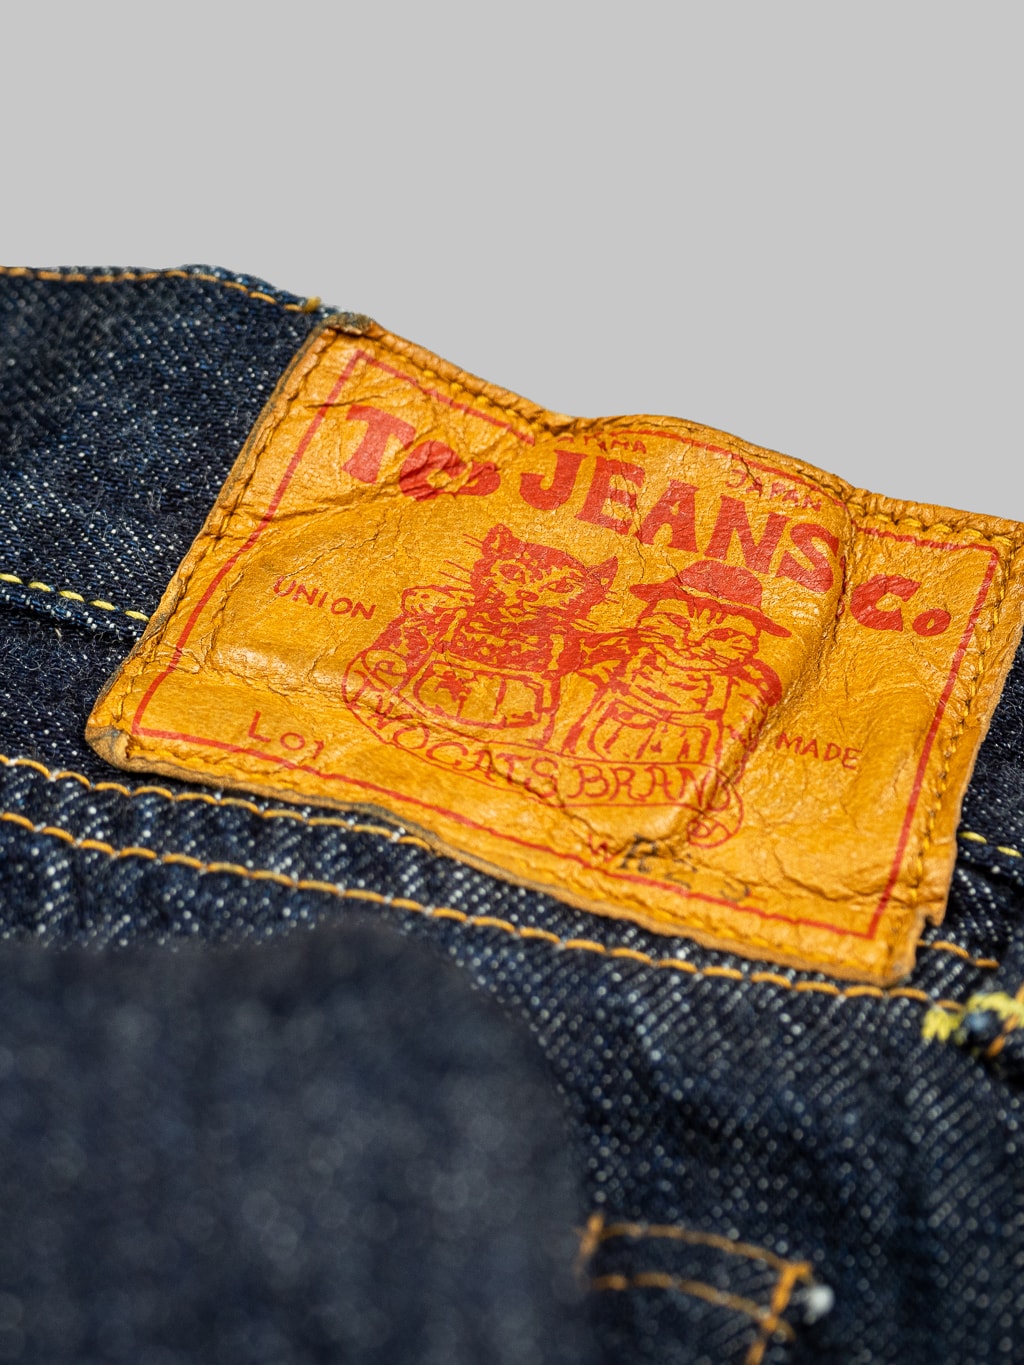 TCB 50s Slim R Jeans leather patch